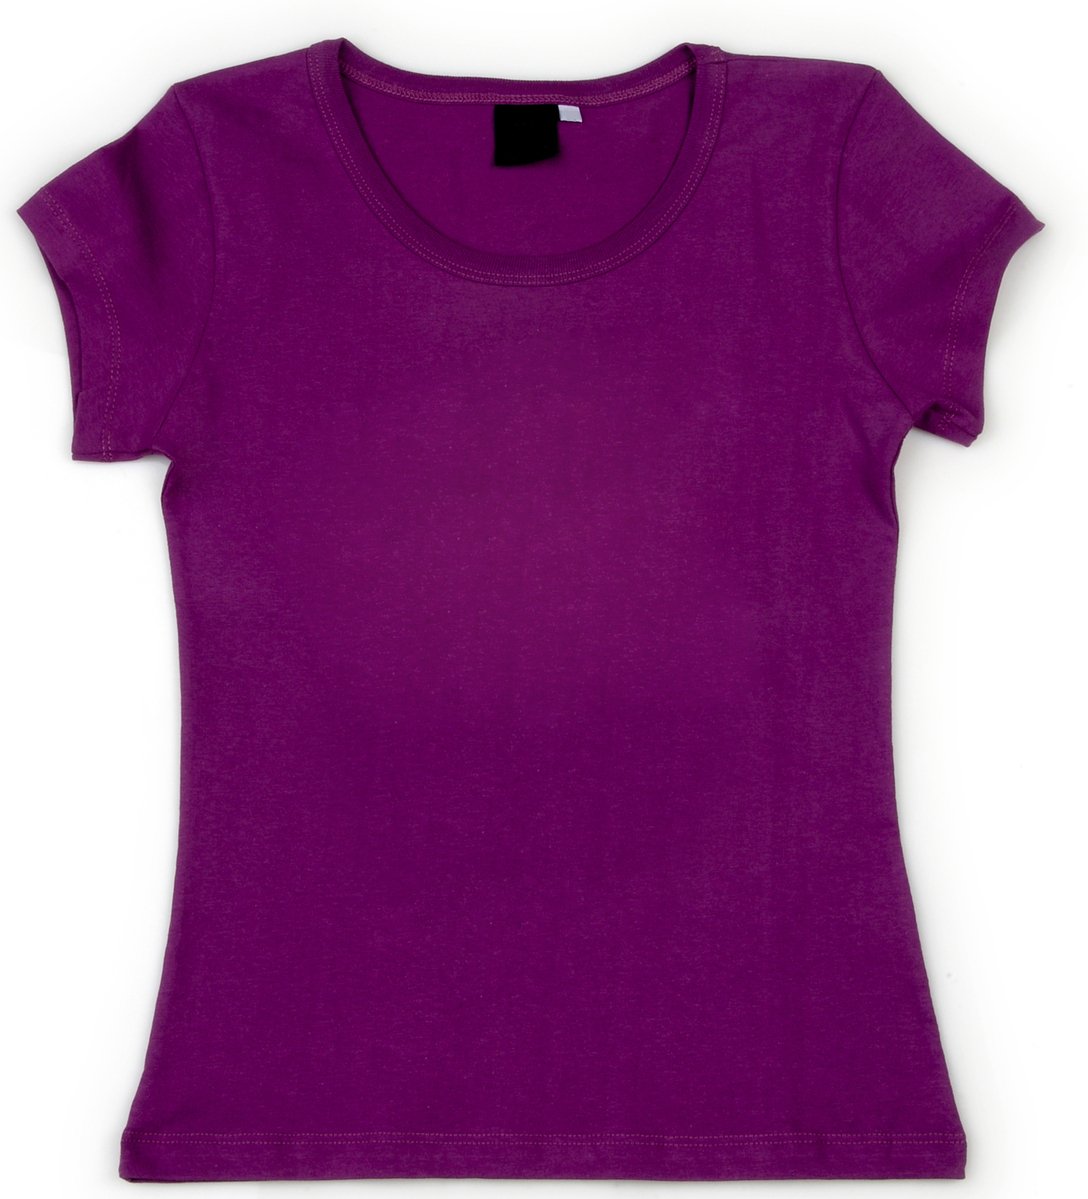 a women's purple t - shirt with short sleeves